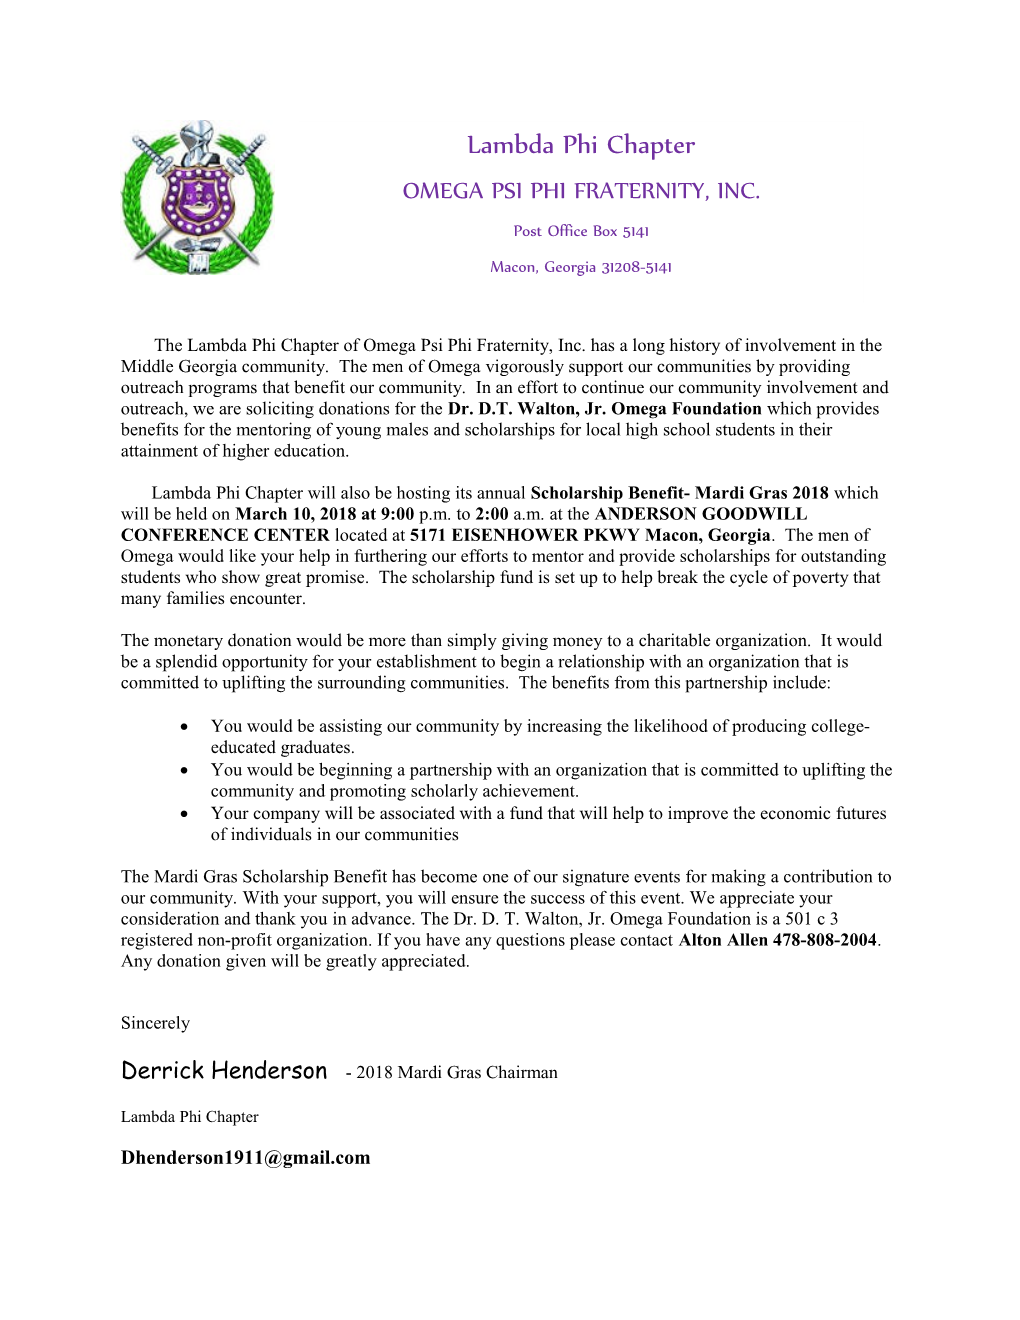 The Lambda Phi Chapter of Omega Psi Phi Fraternity, Inc. Has a Long History of Involvement